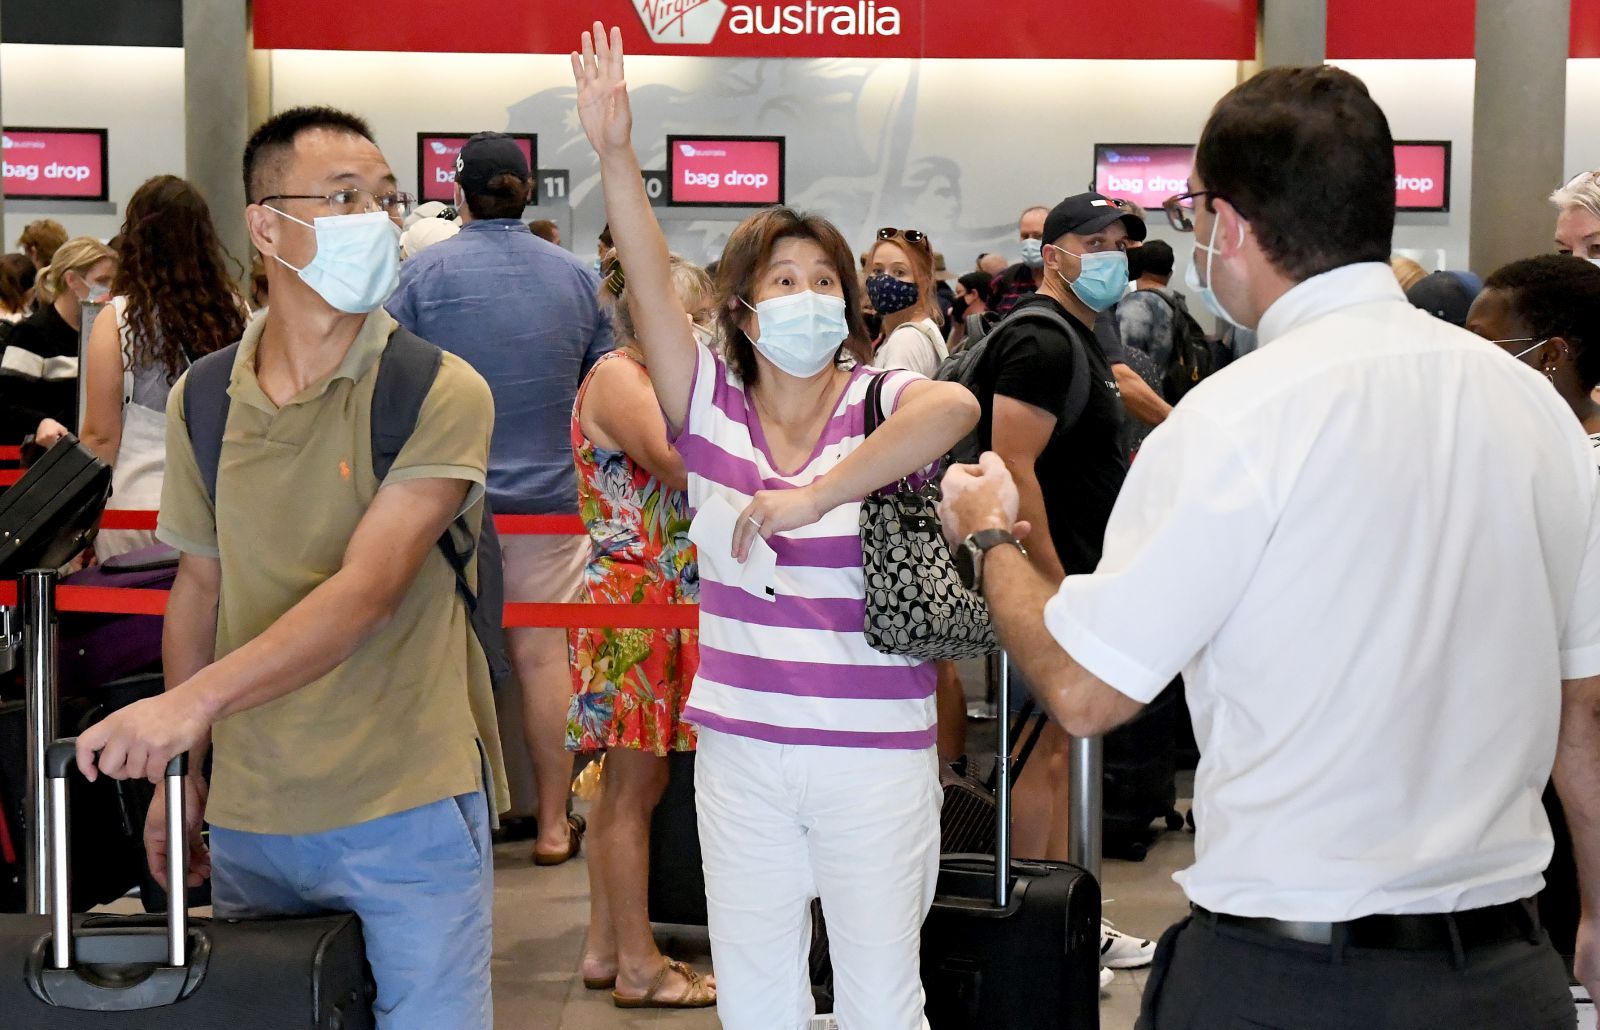 epa09104395 A passenger reacts as she attempts to check in for a flight from the domestic airport in Brisbane, Autralia, 29 March 2021. Greater Brisbane will enter a snap three-day lockdown as its coronavirus outbreak continues to grow.  EPA/DAVE HUNT AUSTRALIA AND NEW ZEALAND OUT